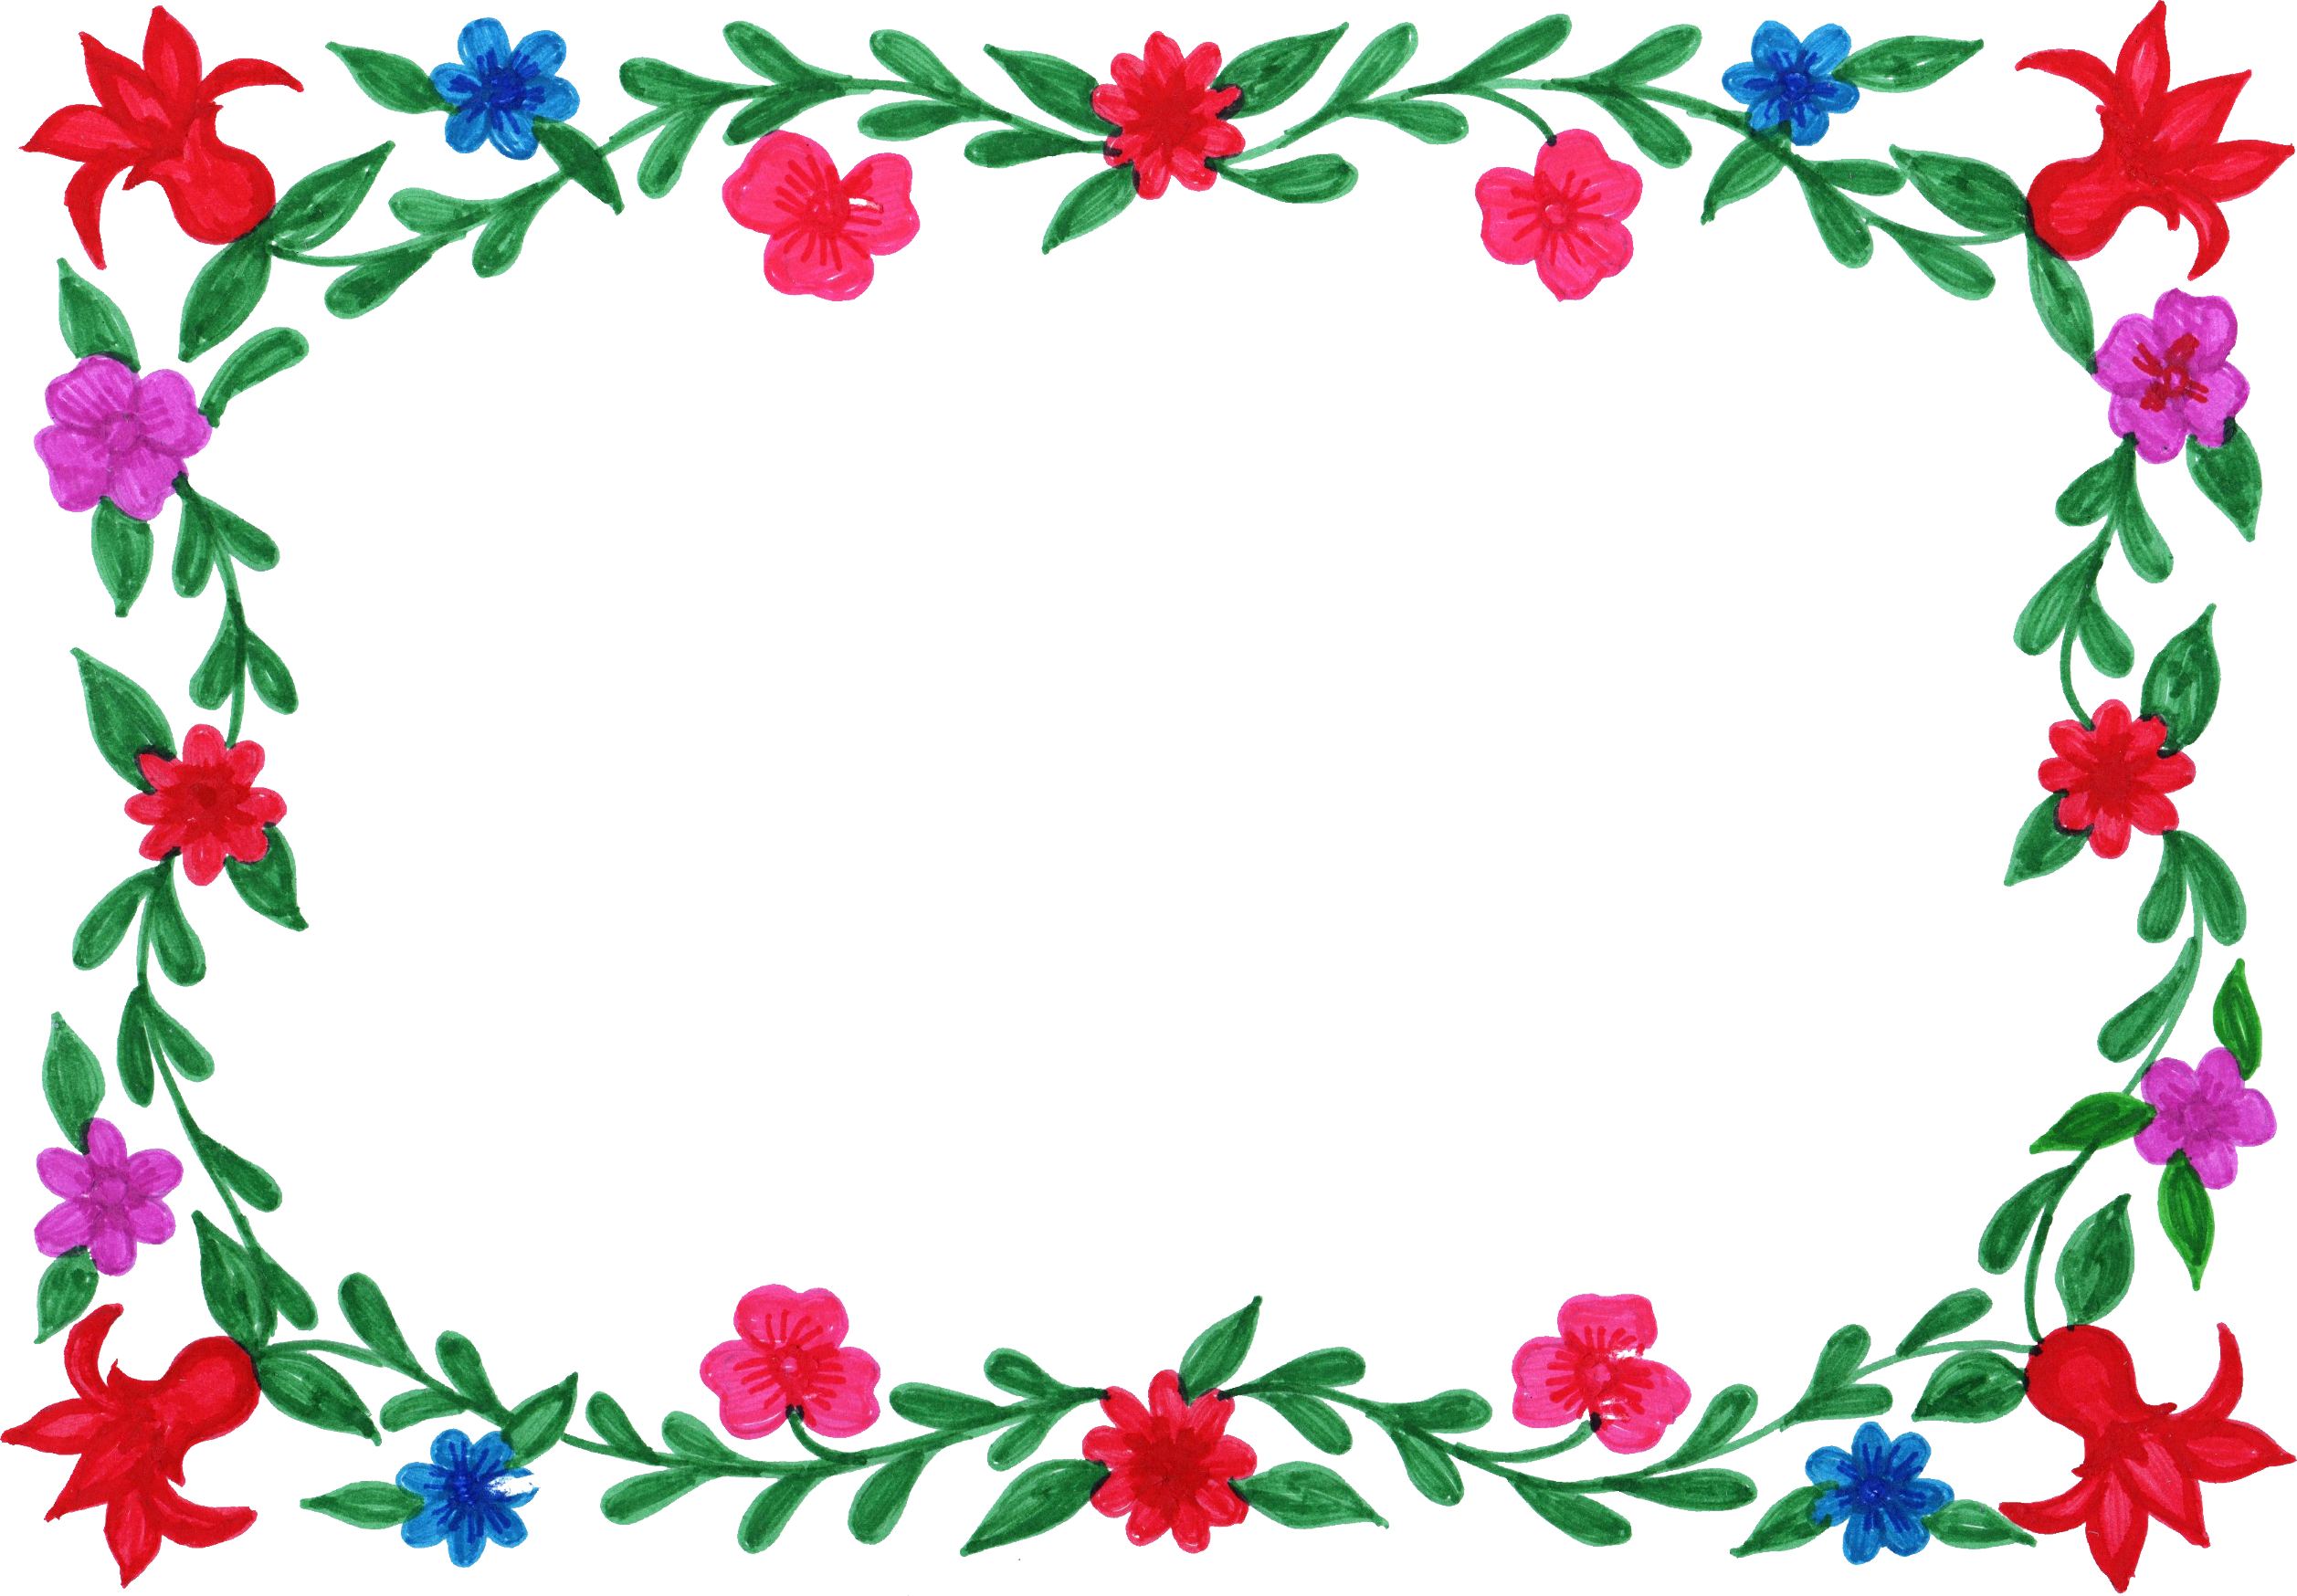 Free Flowers Frame Png, Download Free Flowers Frame Png png images